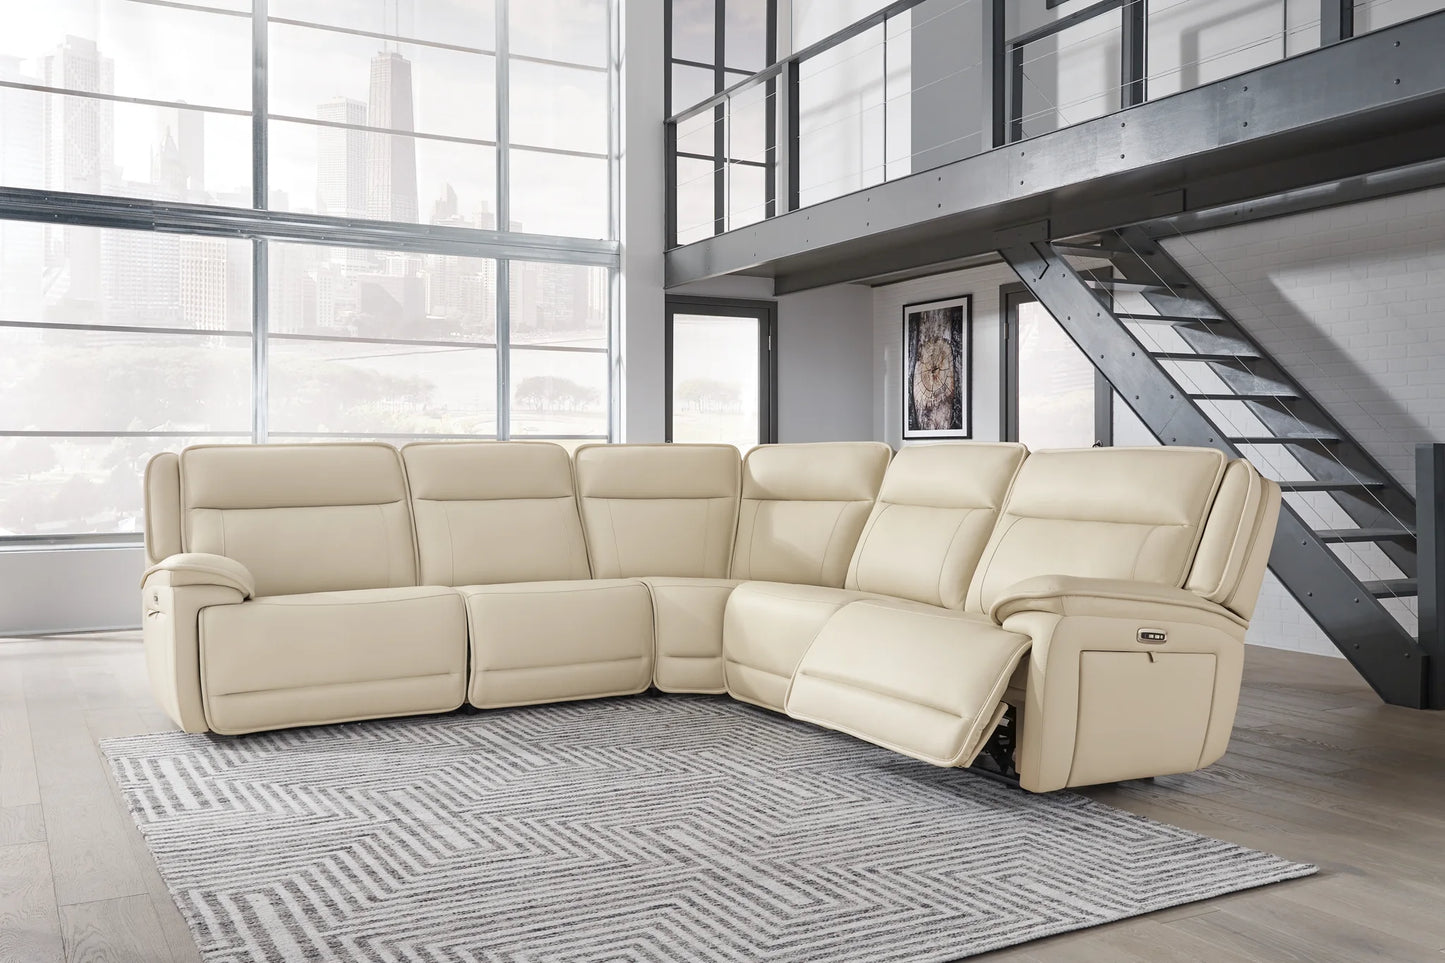 Double Deal - Almond - 5-Piece Power Reclining Sectional 1